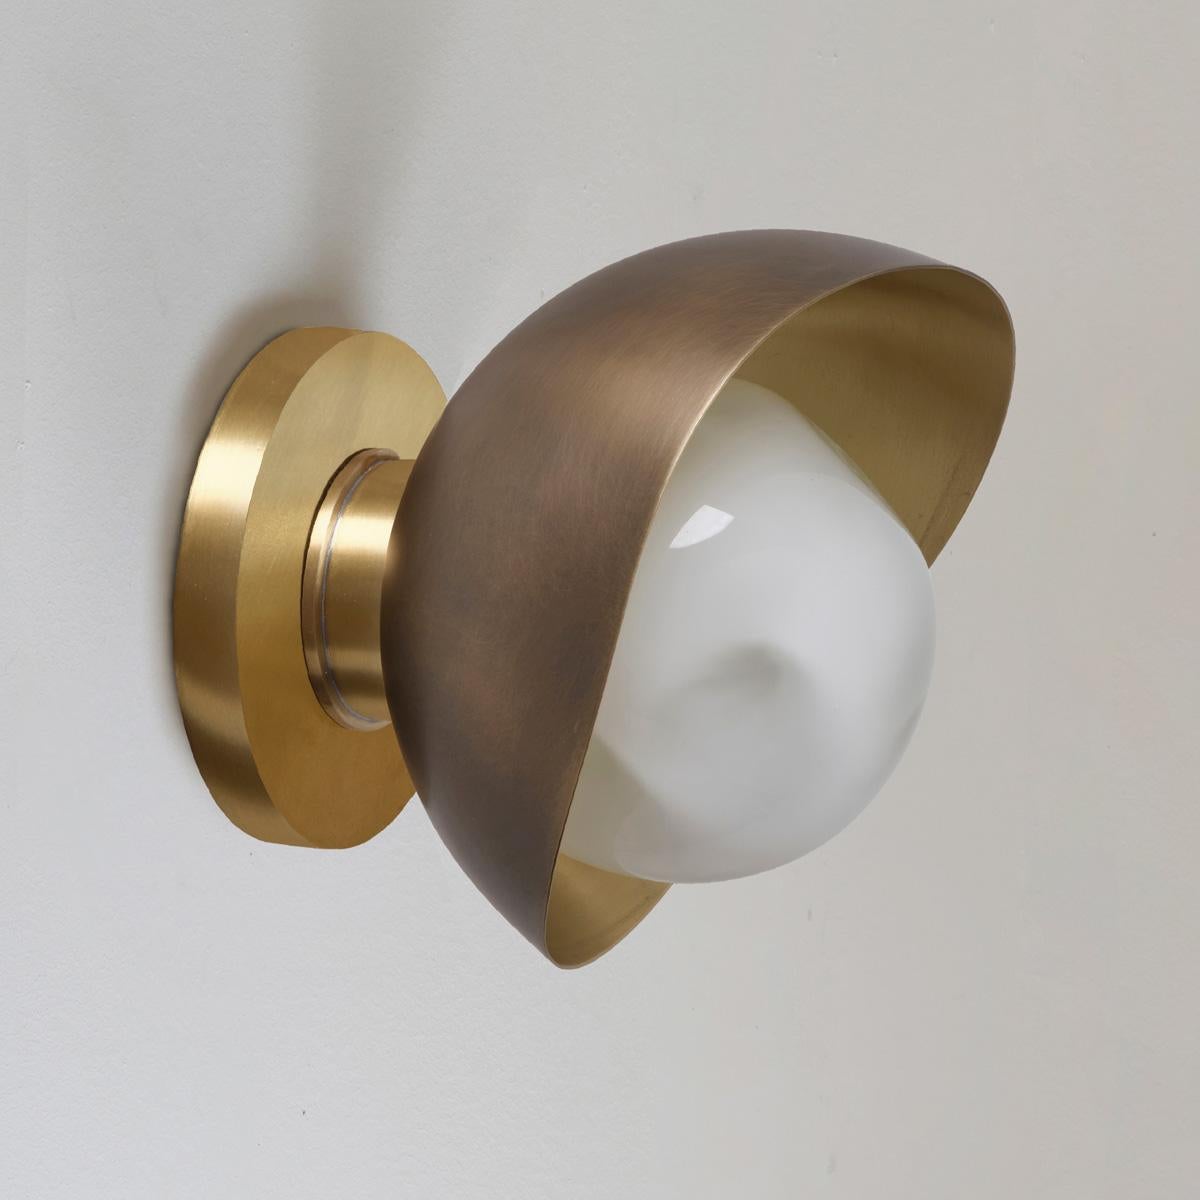 Perla Mini Wall Light by Gaspare Asaro. Sand White and Satin Brass Finish For Sale 1